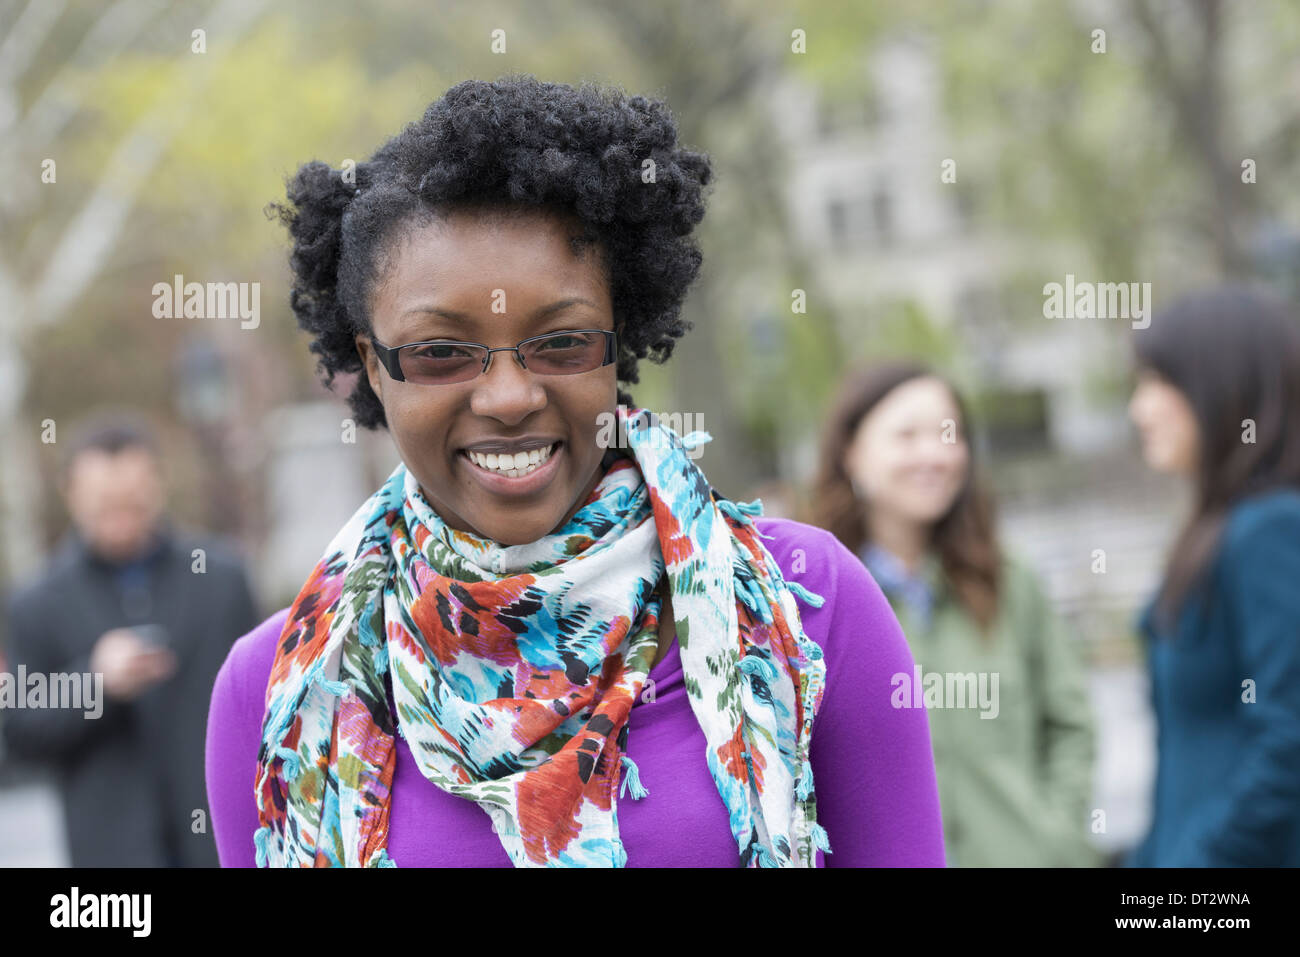 A group of people in a city park A young woman smiling wearing a purple shirt and floral scarf Stock Photo